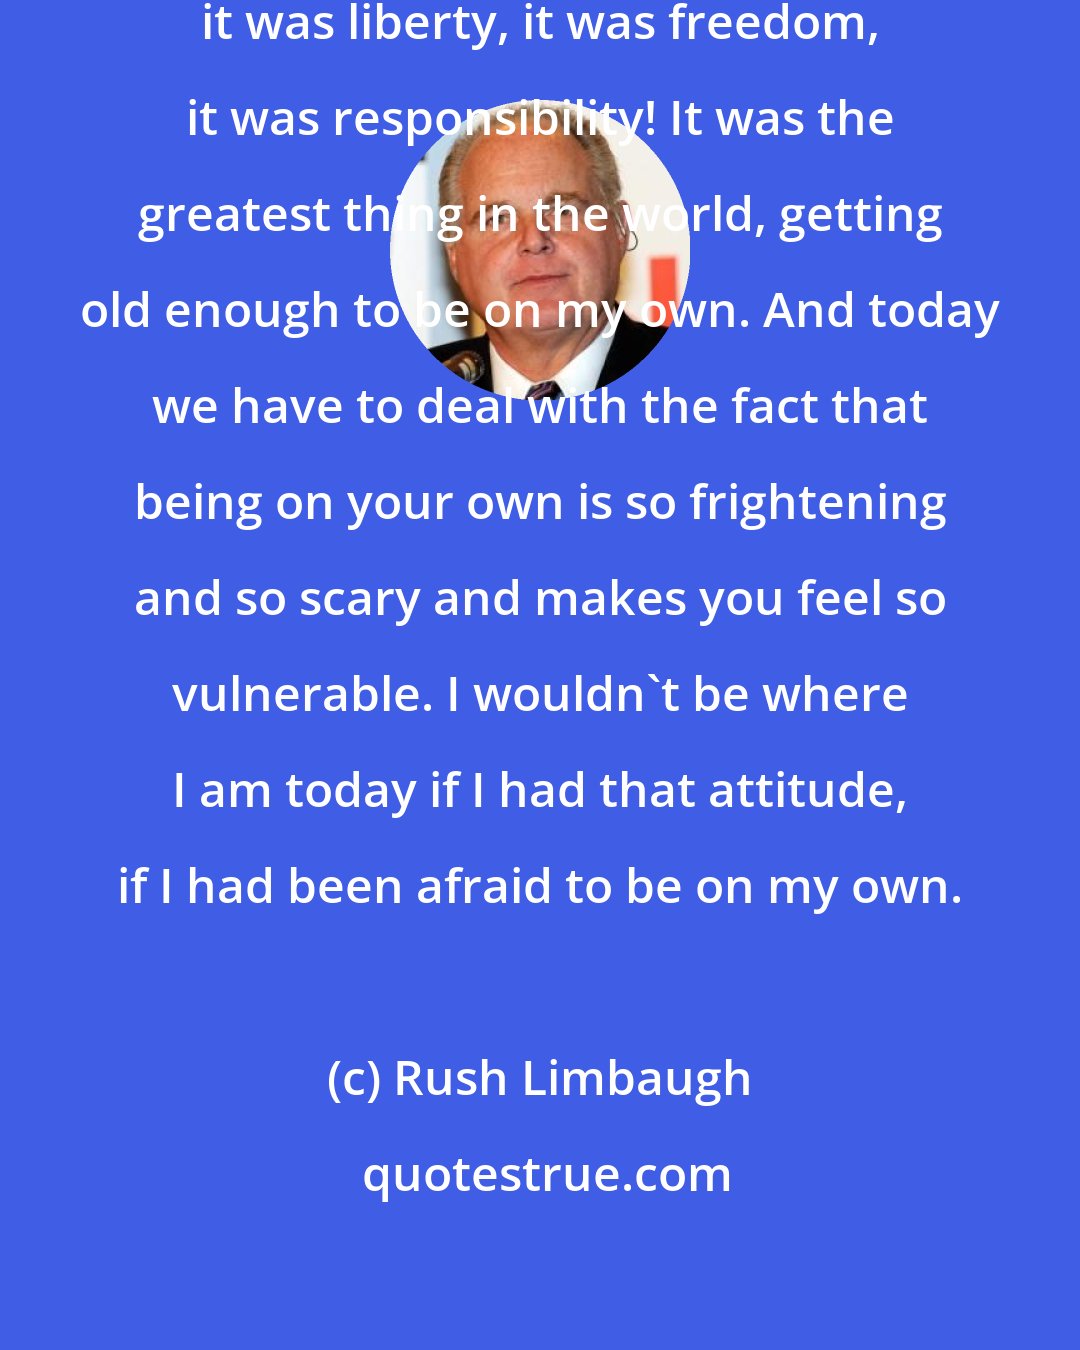 Rush Limbaugh: Being on my own was liberation, it was liberty, it was freedom, it was responsibility! It was the greatest thing in the world, getting old enough to be on my own. And today we have to deal with the fact that being on your own is so frightening and so scary and makes you feel so vulnerable. I wouldn't be where I am today if I had that attitude, if I had been afraid to be on my own.